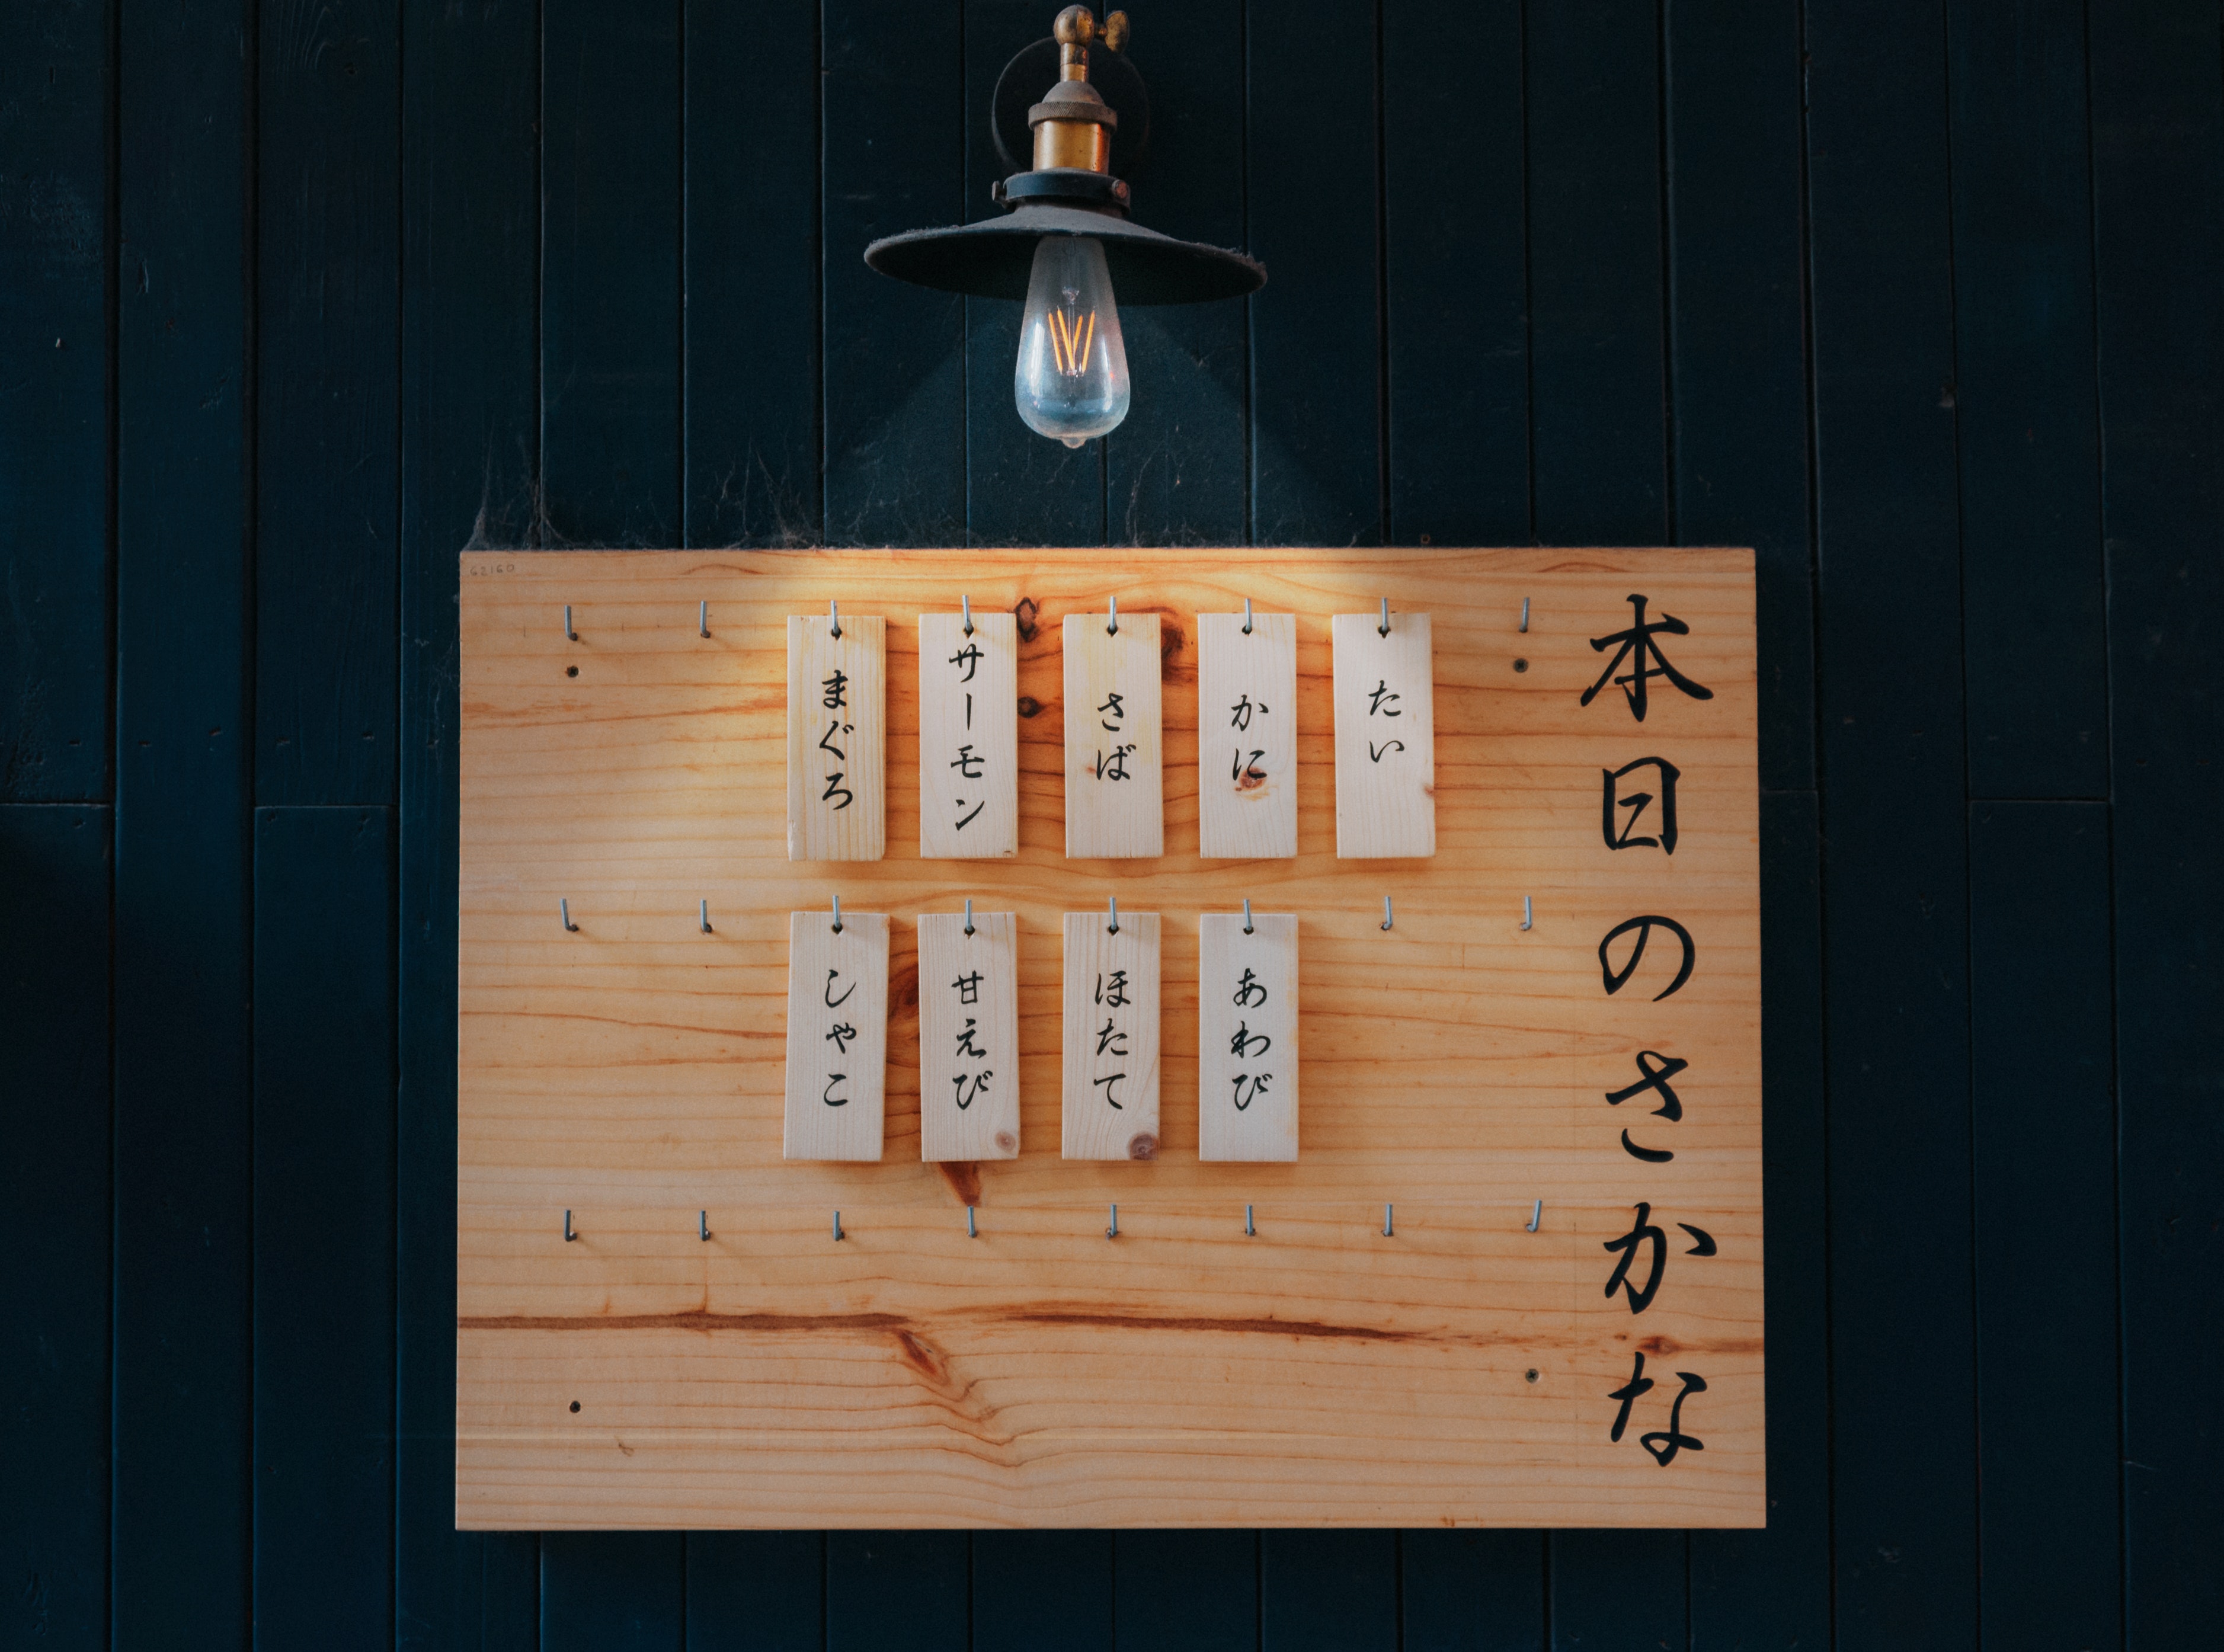 Kanji Printed Tags Hanged on Brown Wooden Board Lighted by Pendant Lamp, Board, Lamp, Light, Light bulb, HQ Photo